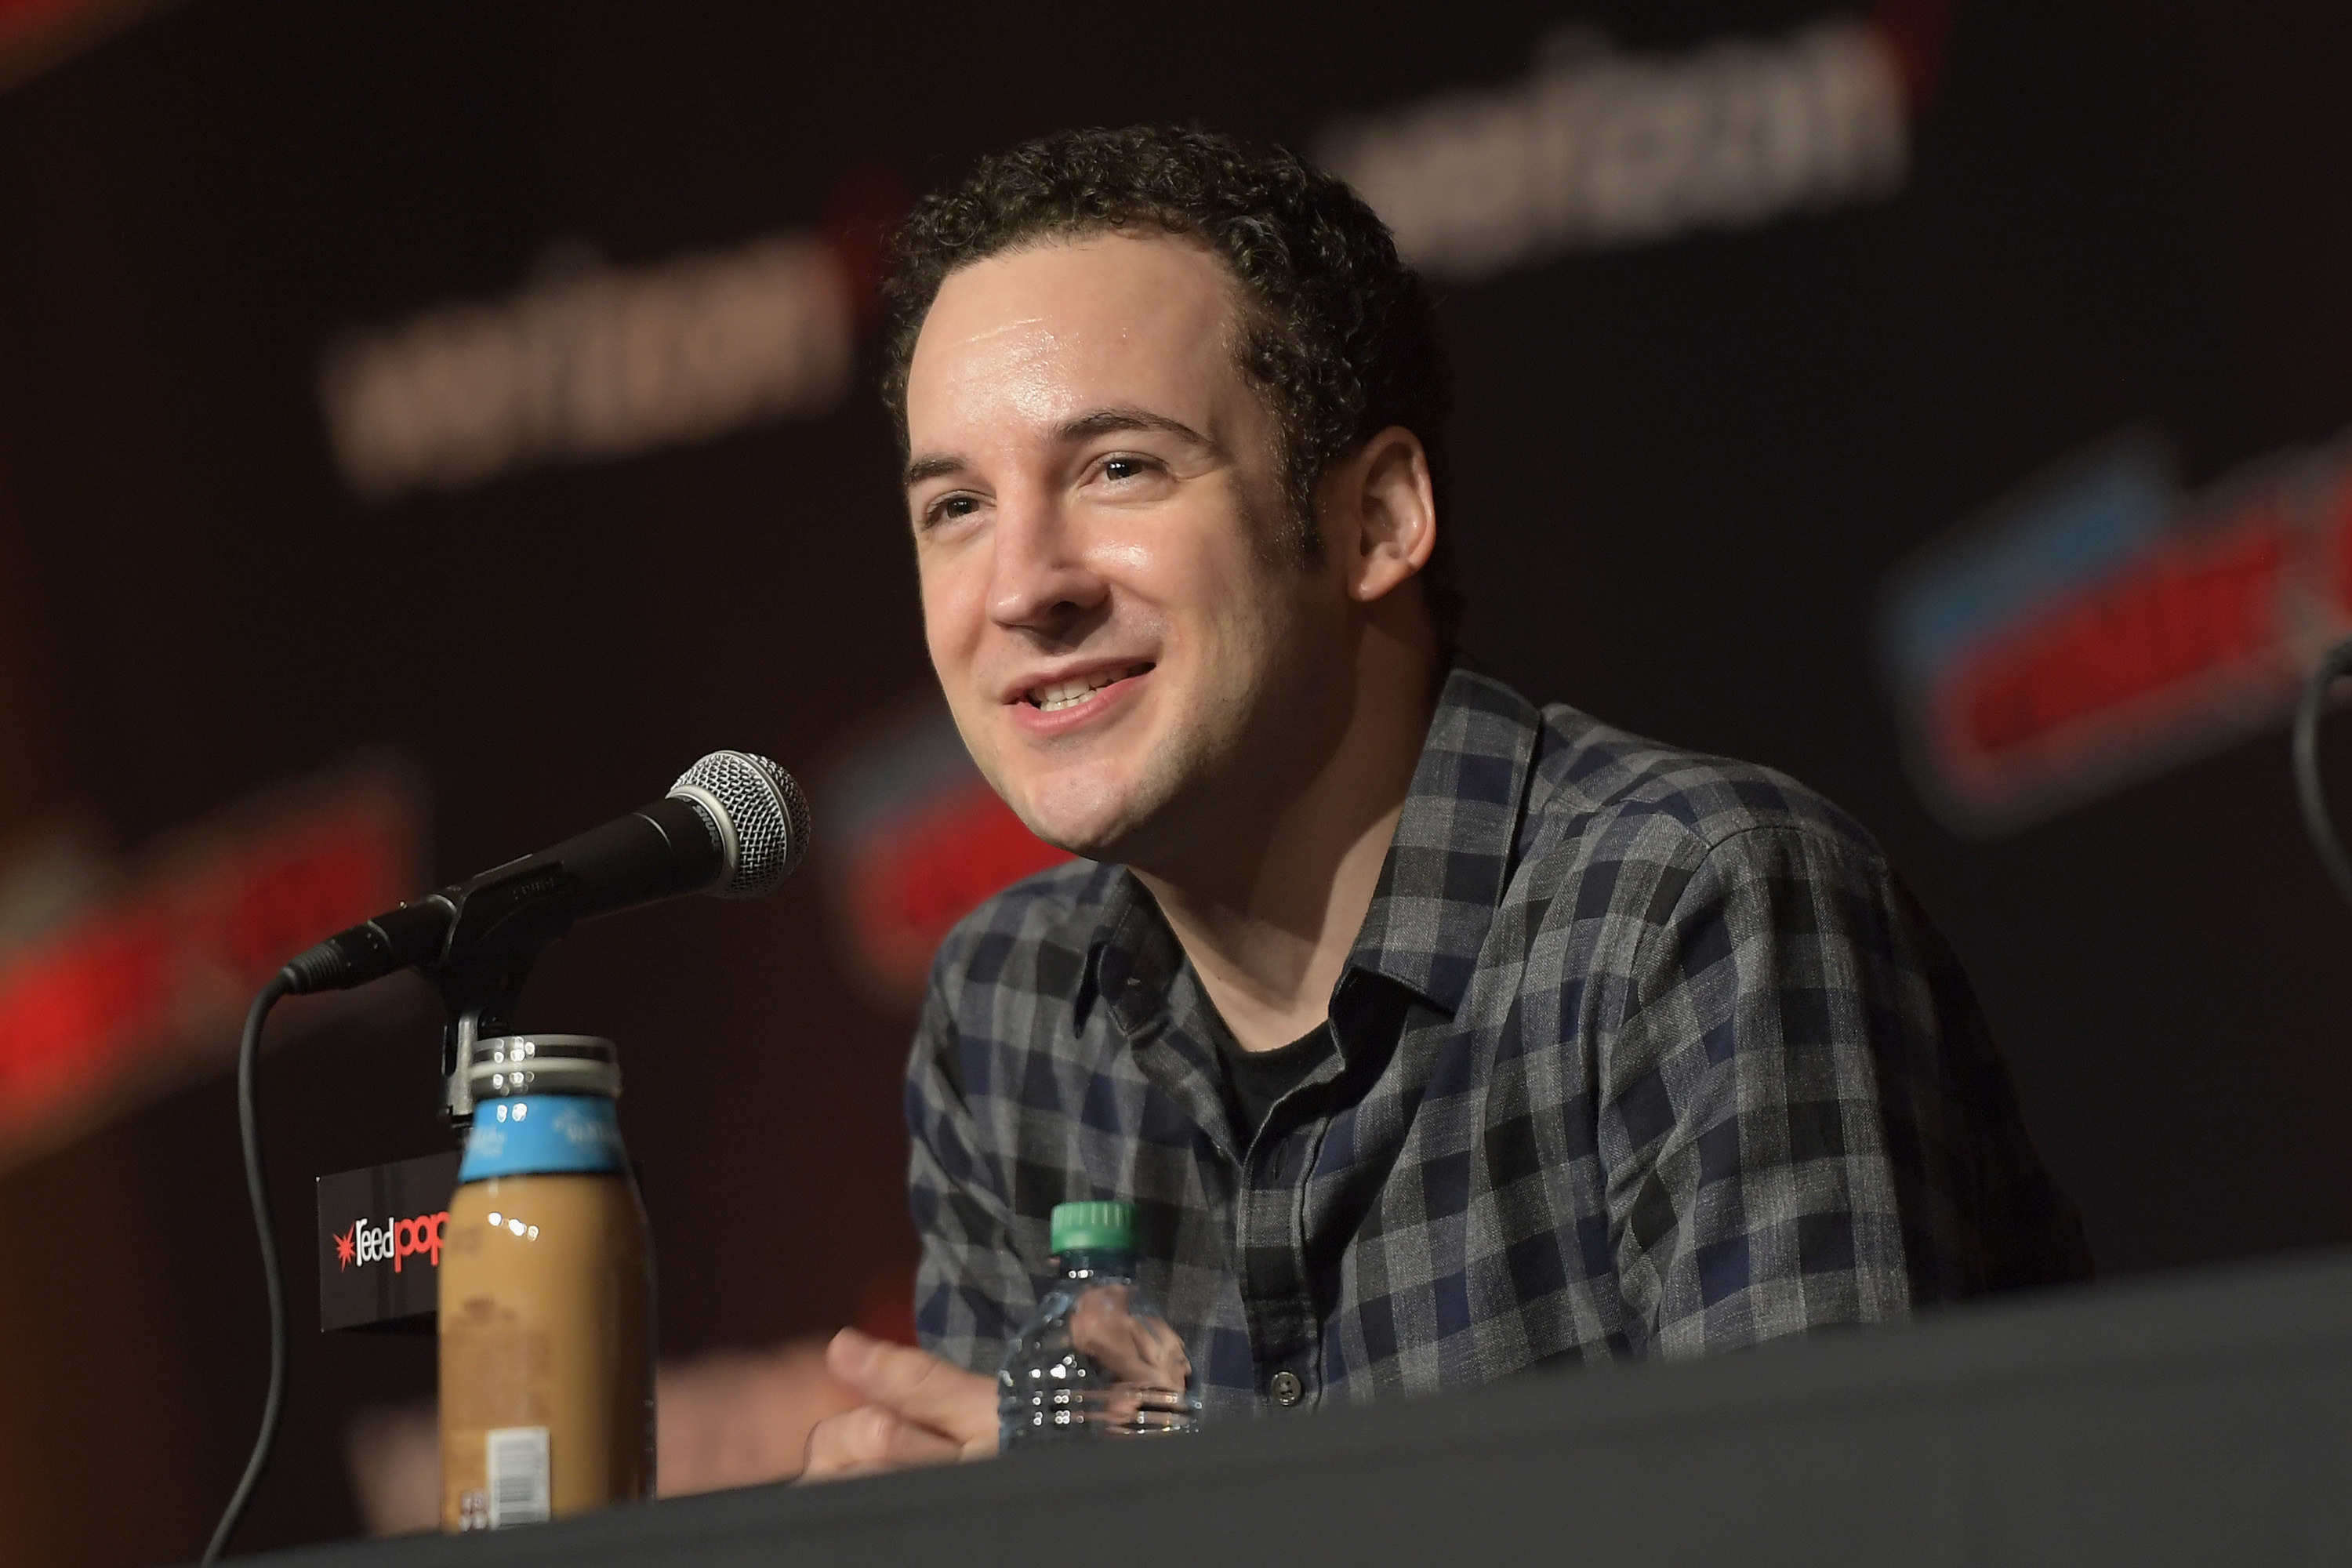 Ben Savage talks to the crowd at the Boy Meets World 25th Anniversary Reunion Panel at Comic Con on October 5, 2018